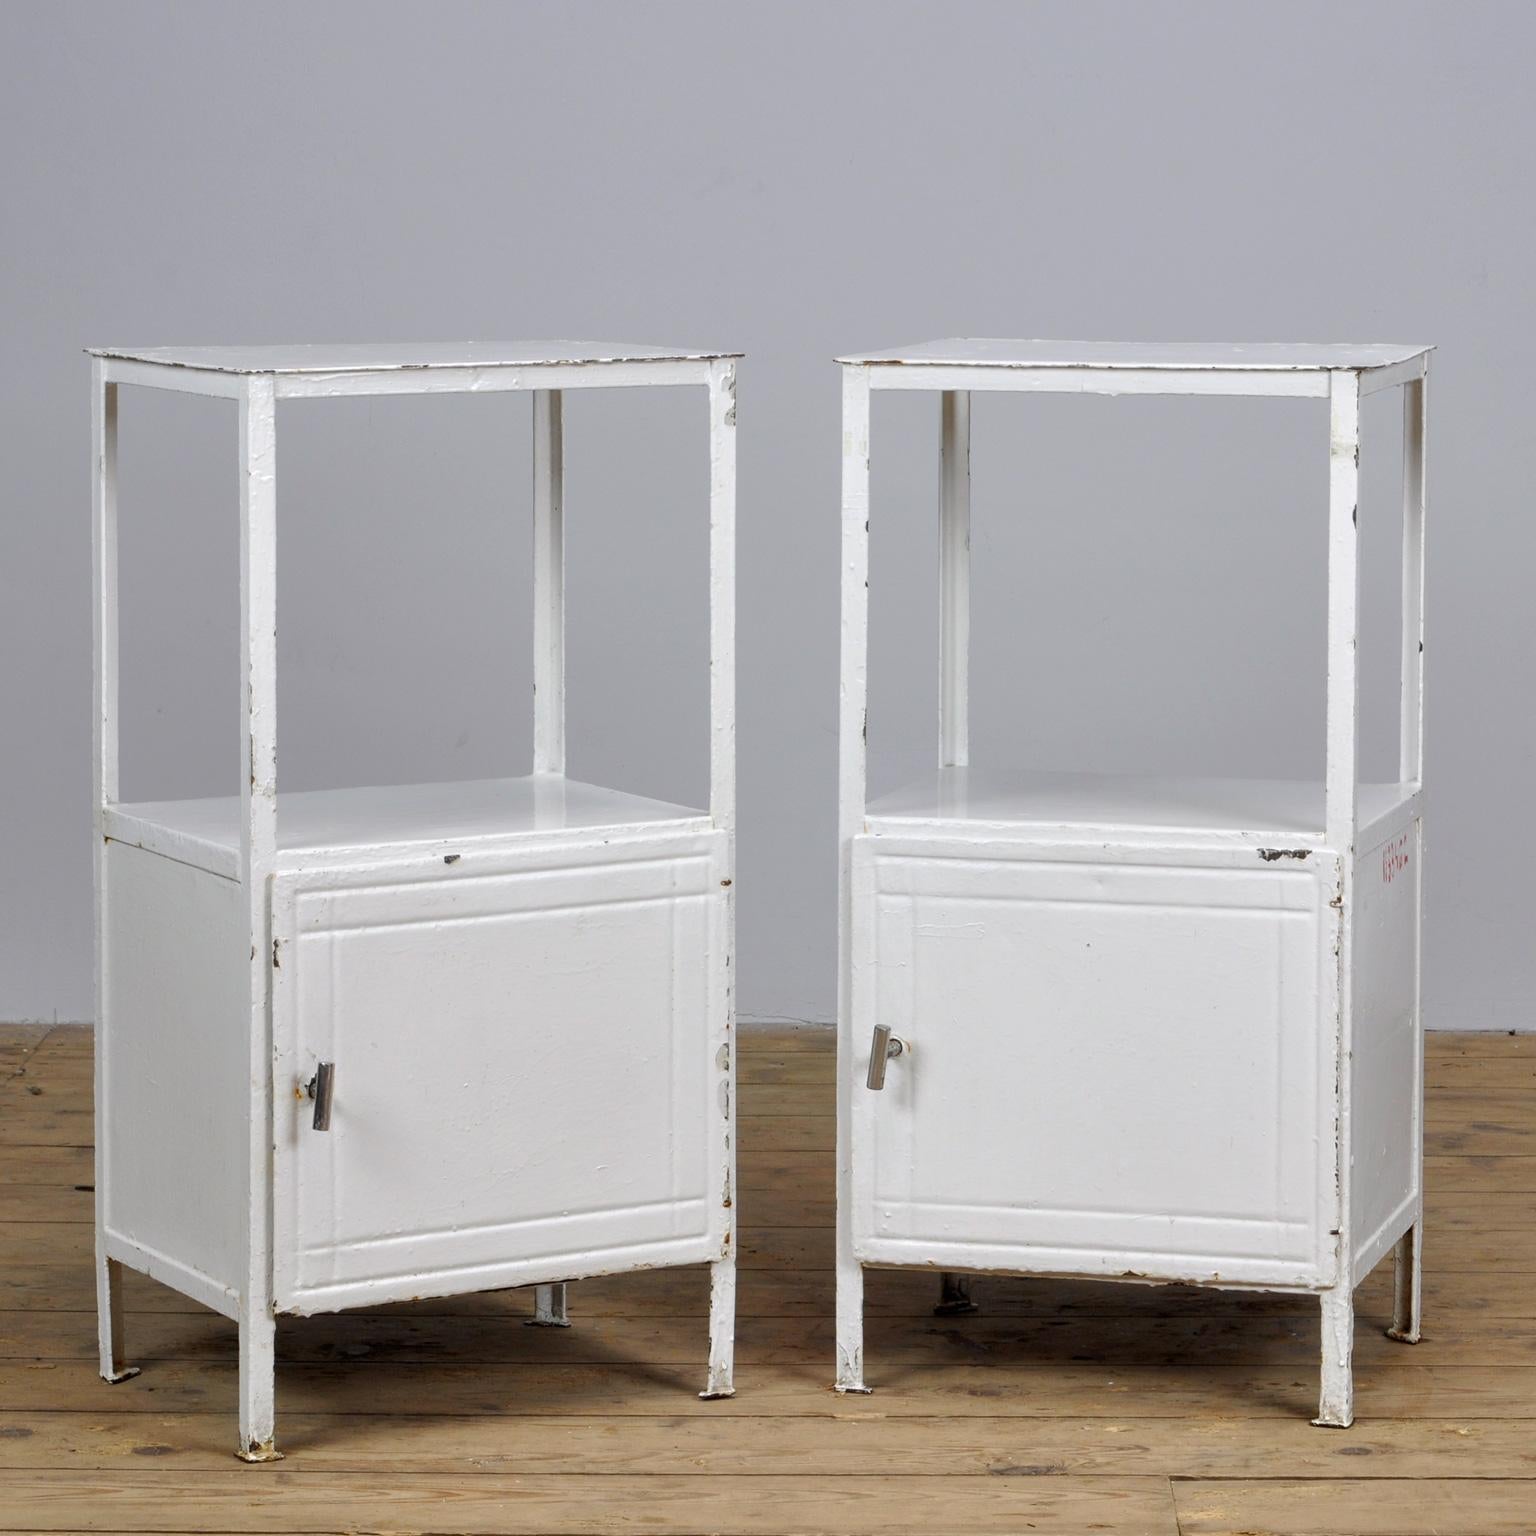 A pair of painted steel hospital bedside cabinets. East German, 1950s.
Price is for the pair.